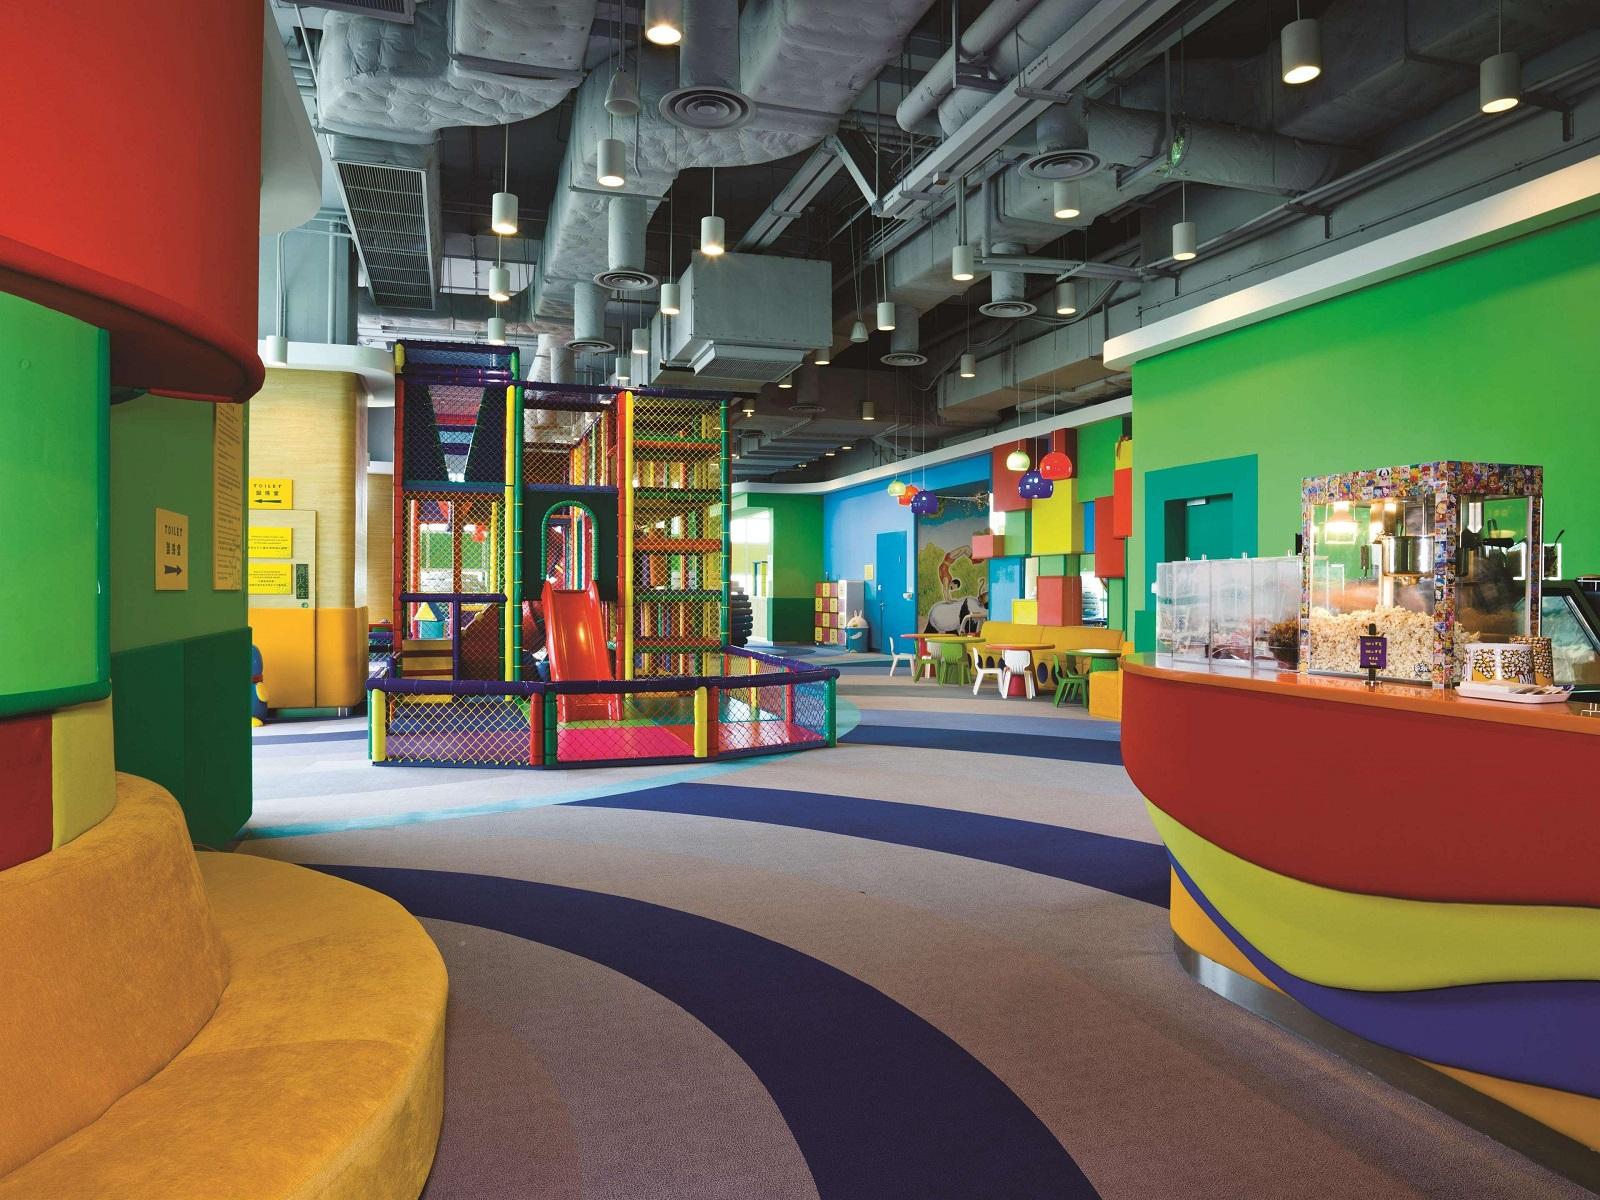 The 5 Best Hotel Kids Clubs in Shanghai